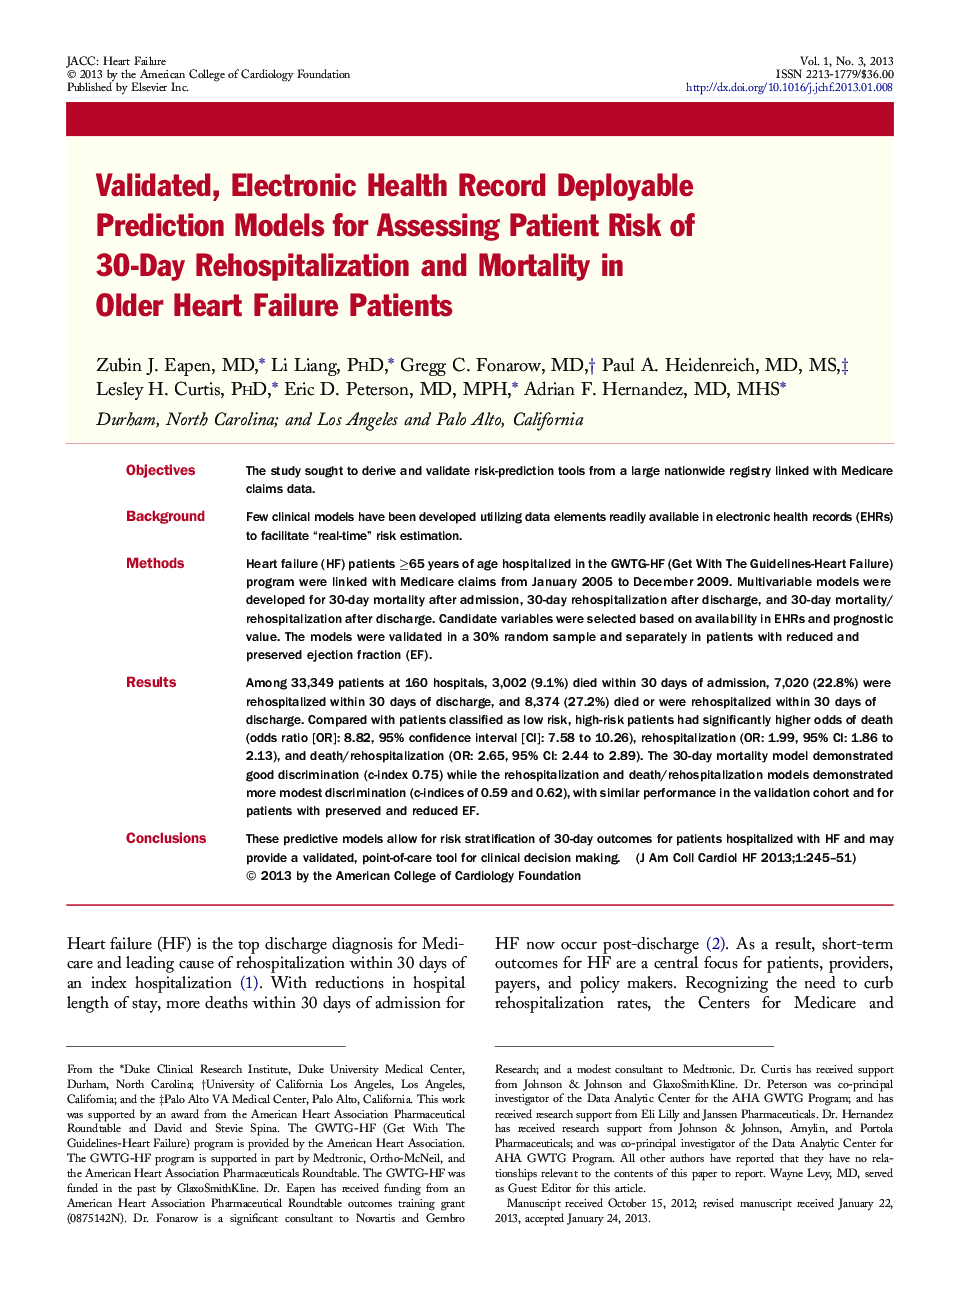 Validated, Electronic Health Record Deployable Prediction Models for Assessing Patient Risk of 30-Day Rehospitalization and Mortality in Older Heart Failure Patients 